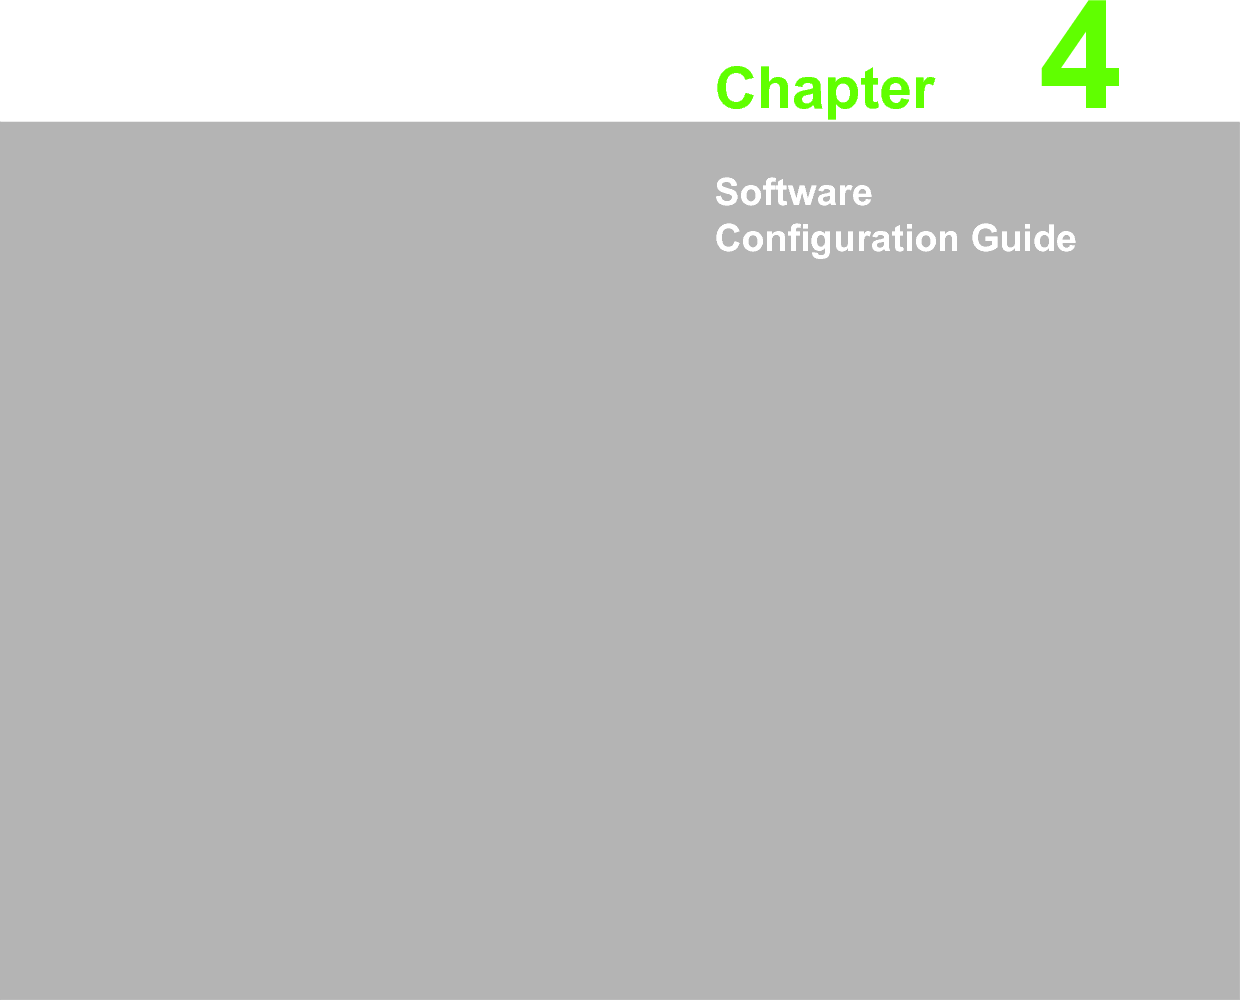 Chapter 44Software Configuration Guide